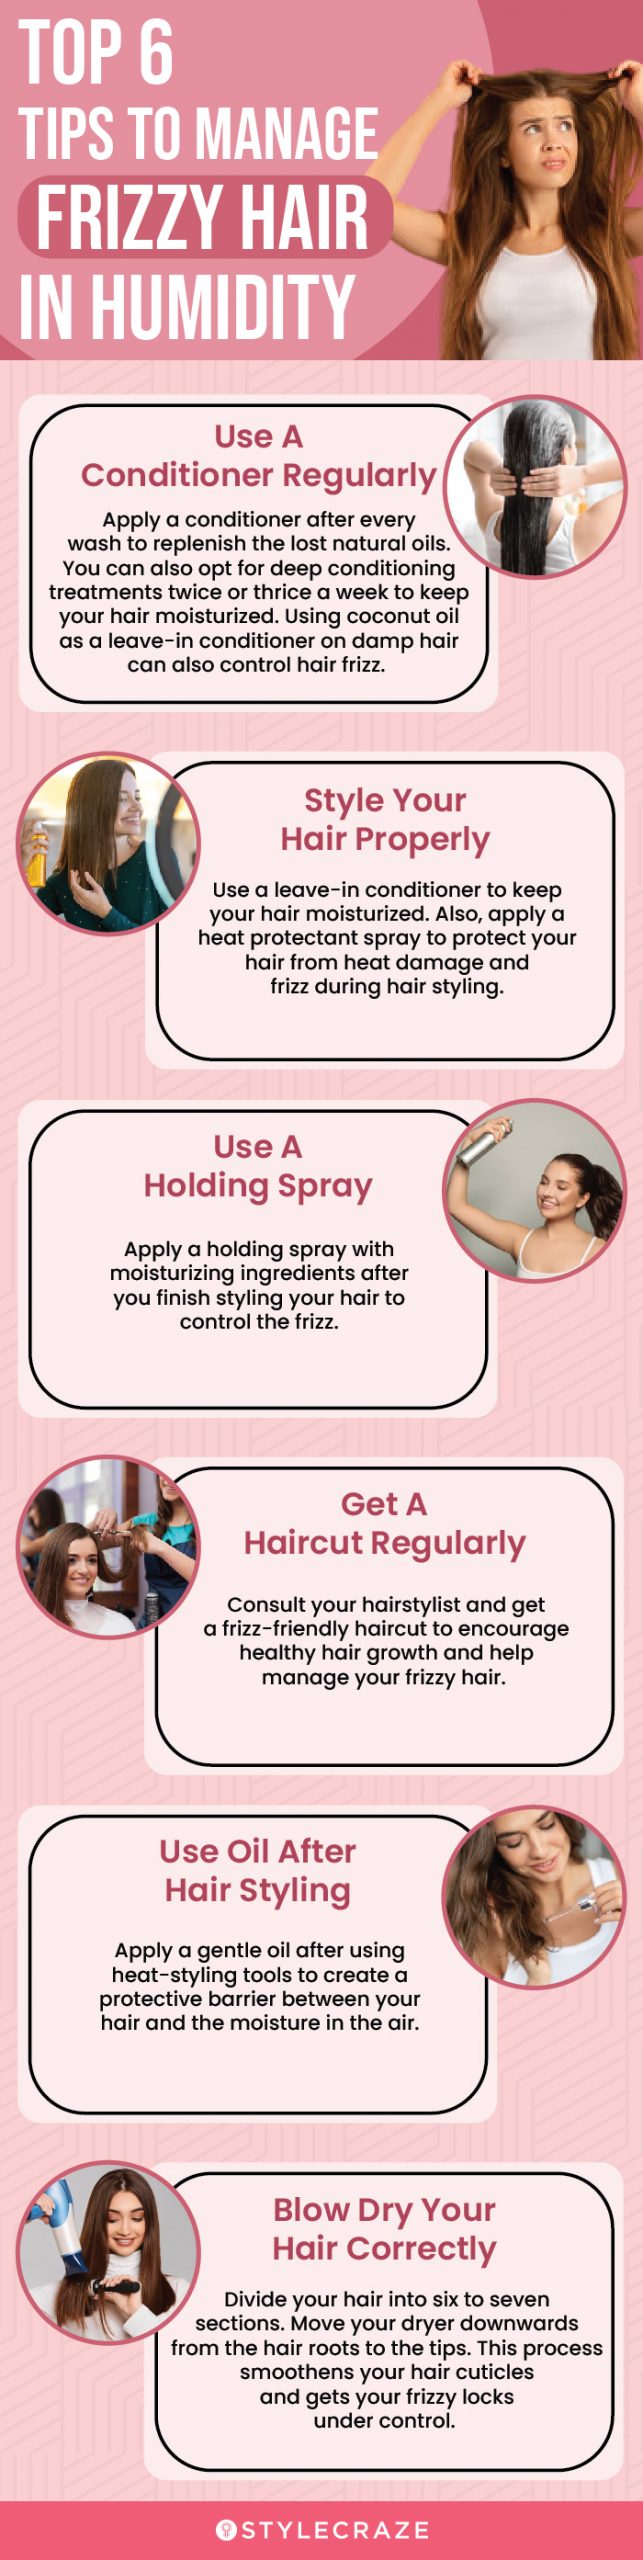 top 6 tips to manage frizzy hair in humidity (infographic)